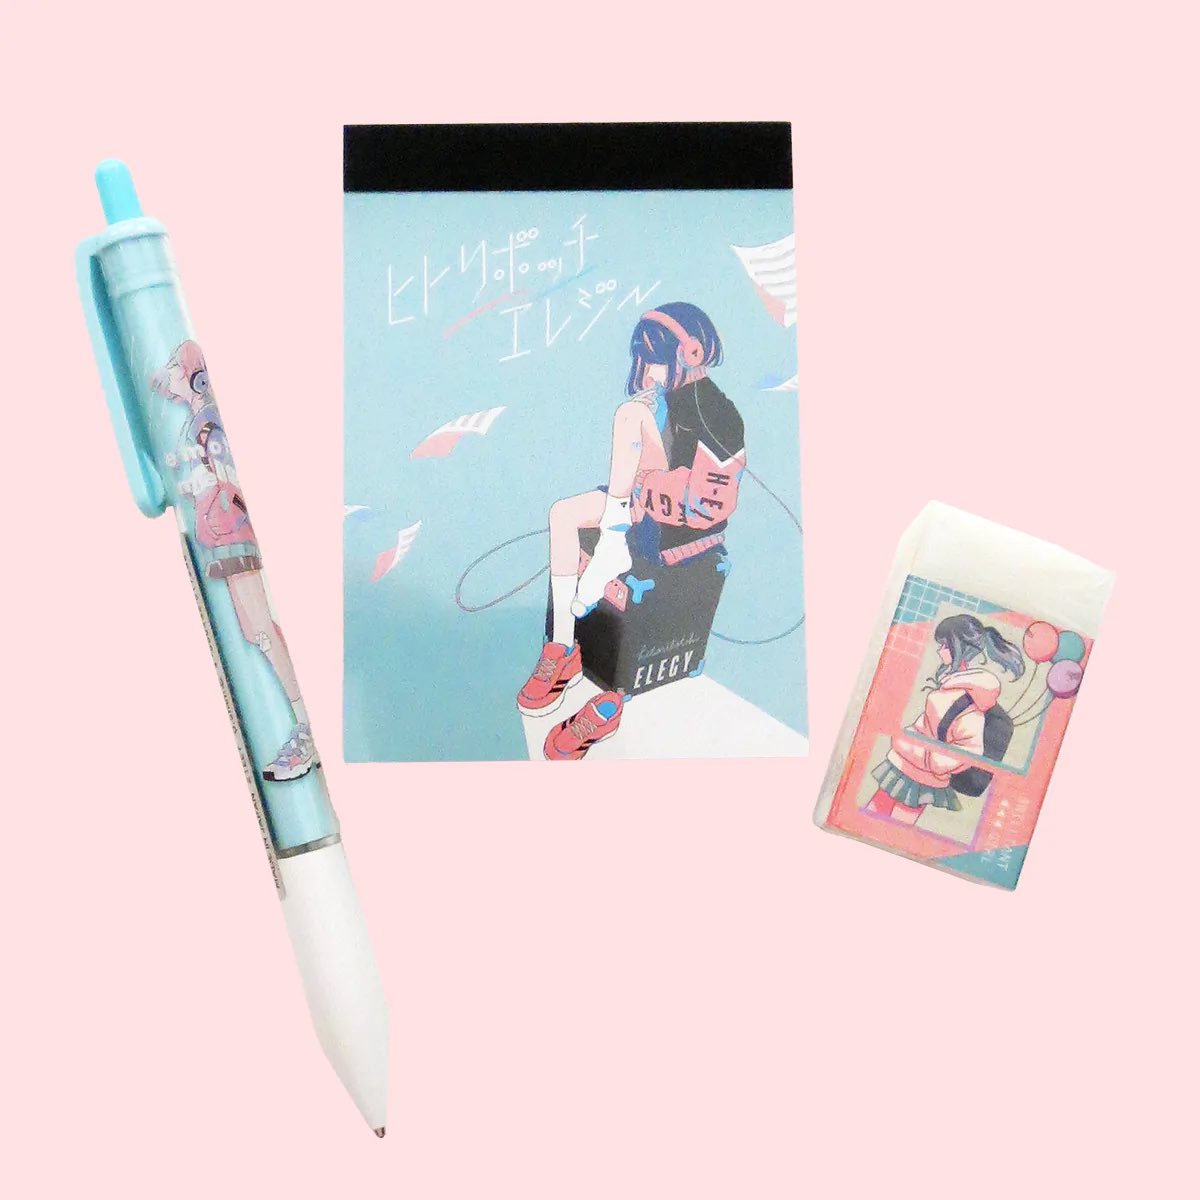 I finally got all these stationery sets up on the shop! They make a really cute small gift. There are 5 different sets, as well as a few loose notepads and erasers.